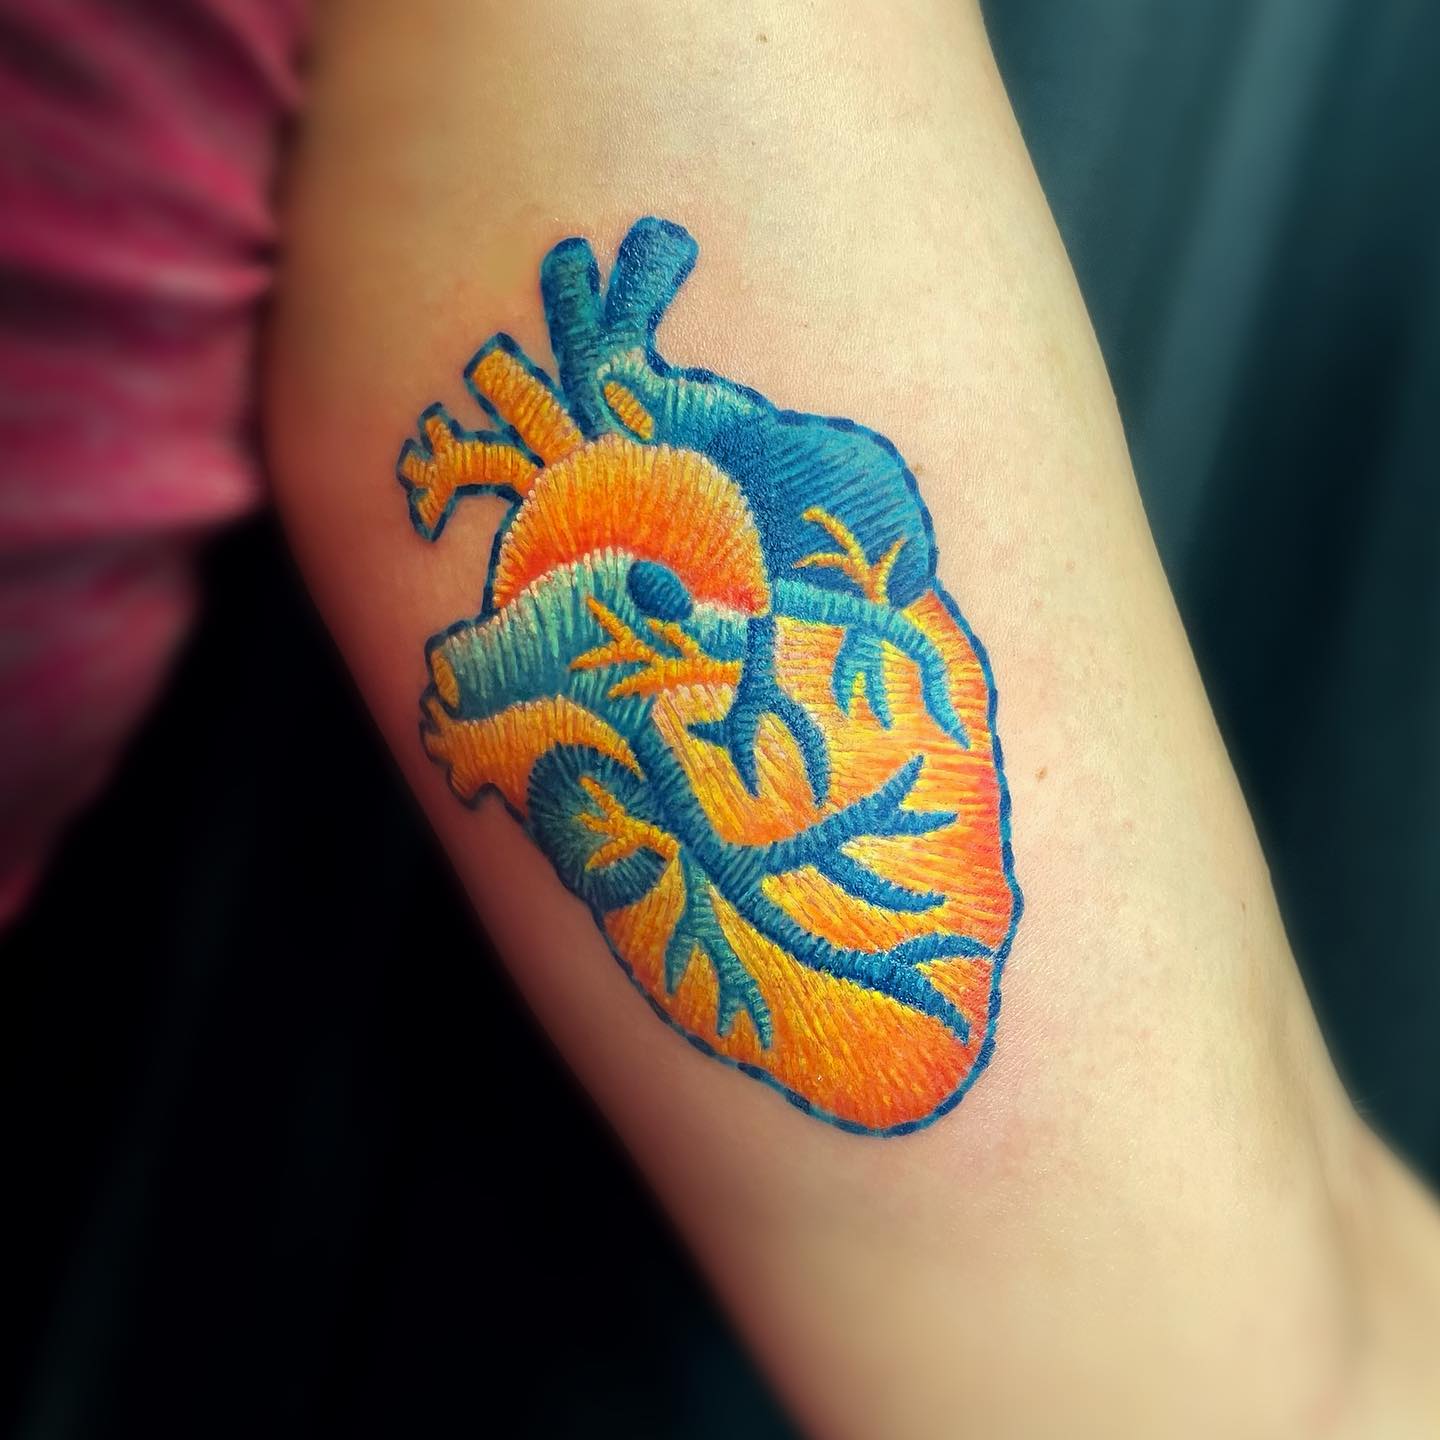 Realistic heart patch tattoo on arm